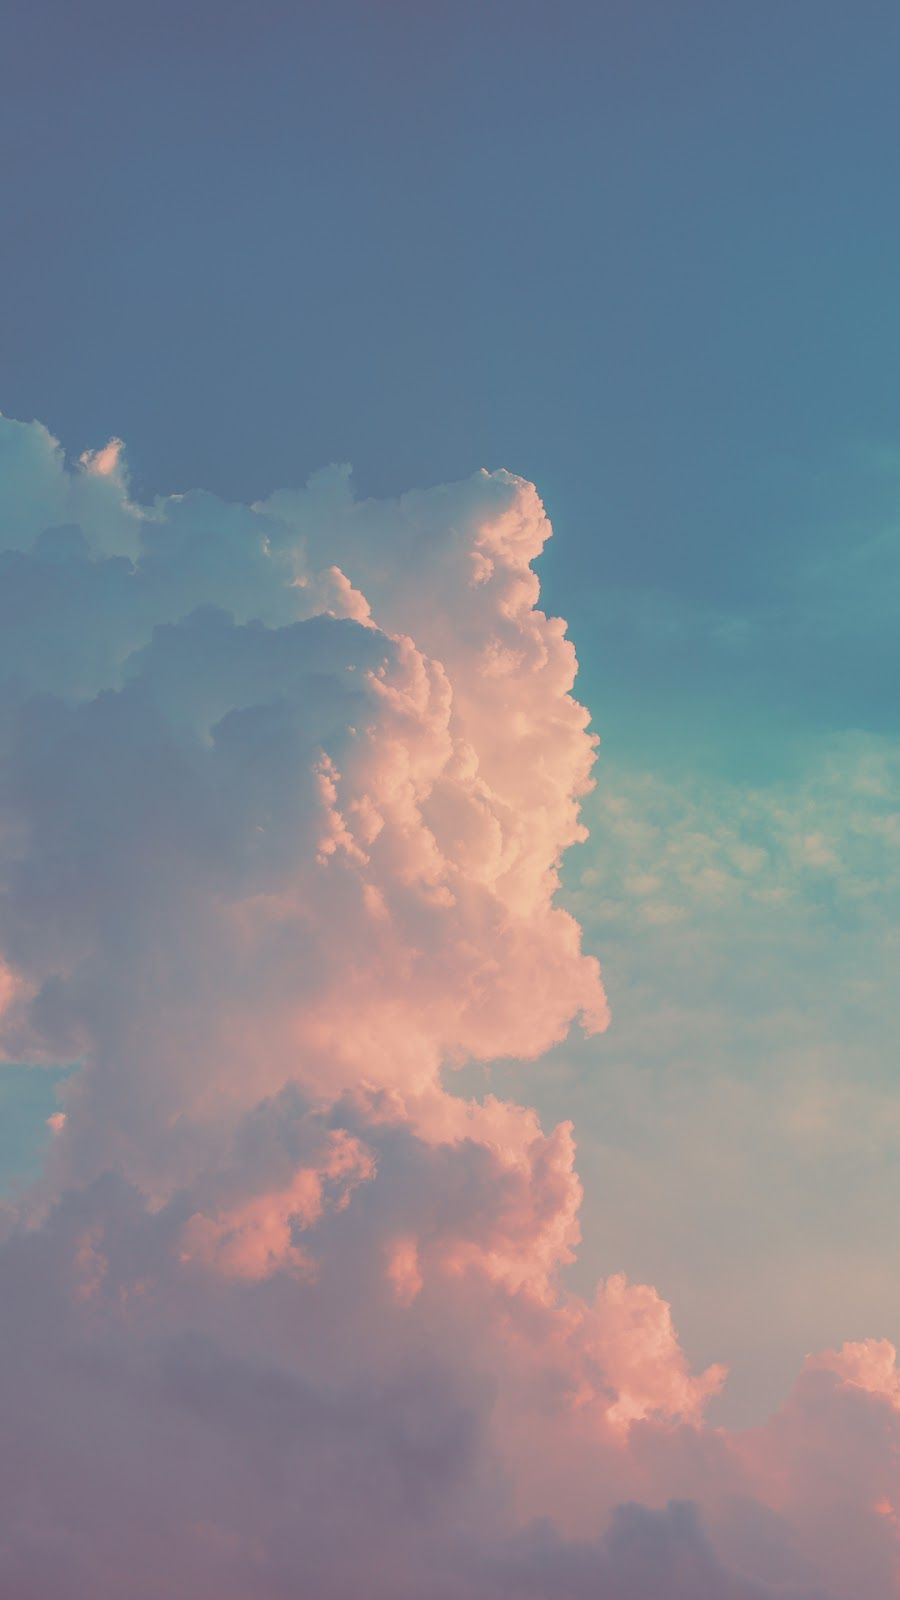 Cloud In The Sky Aesthetic Wallpaper Clouds